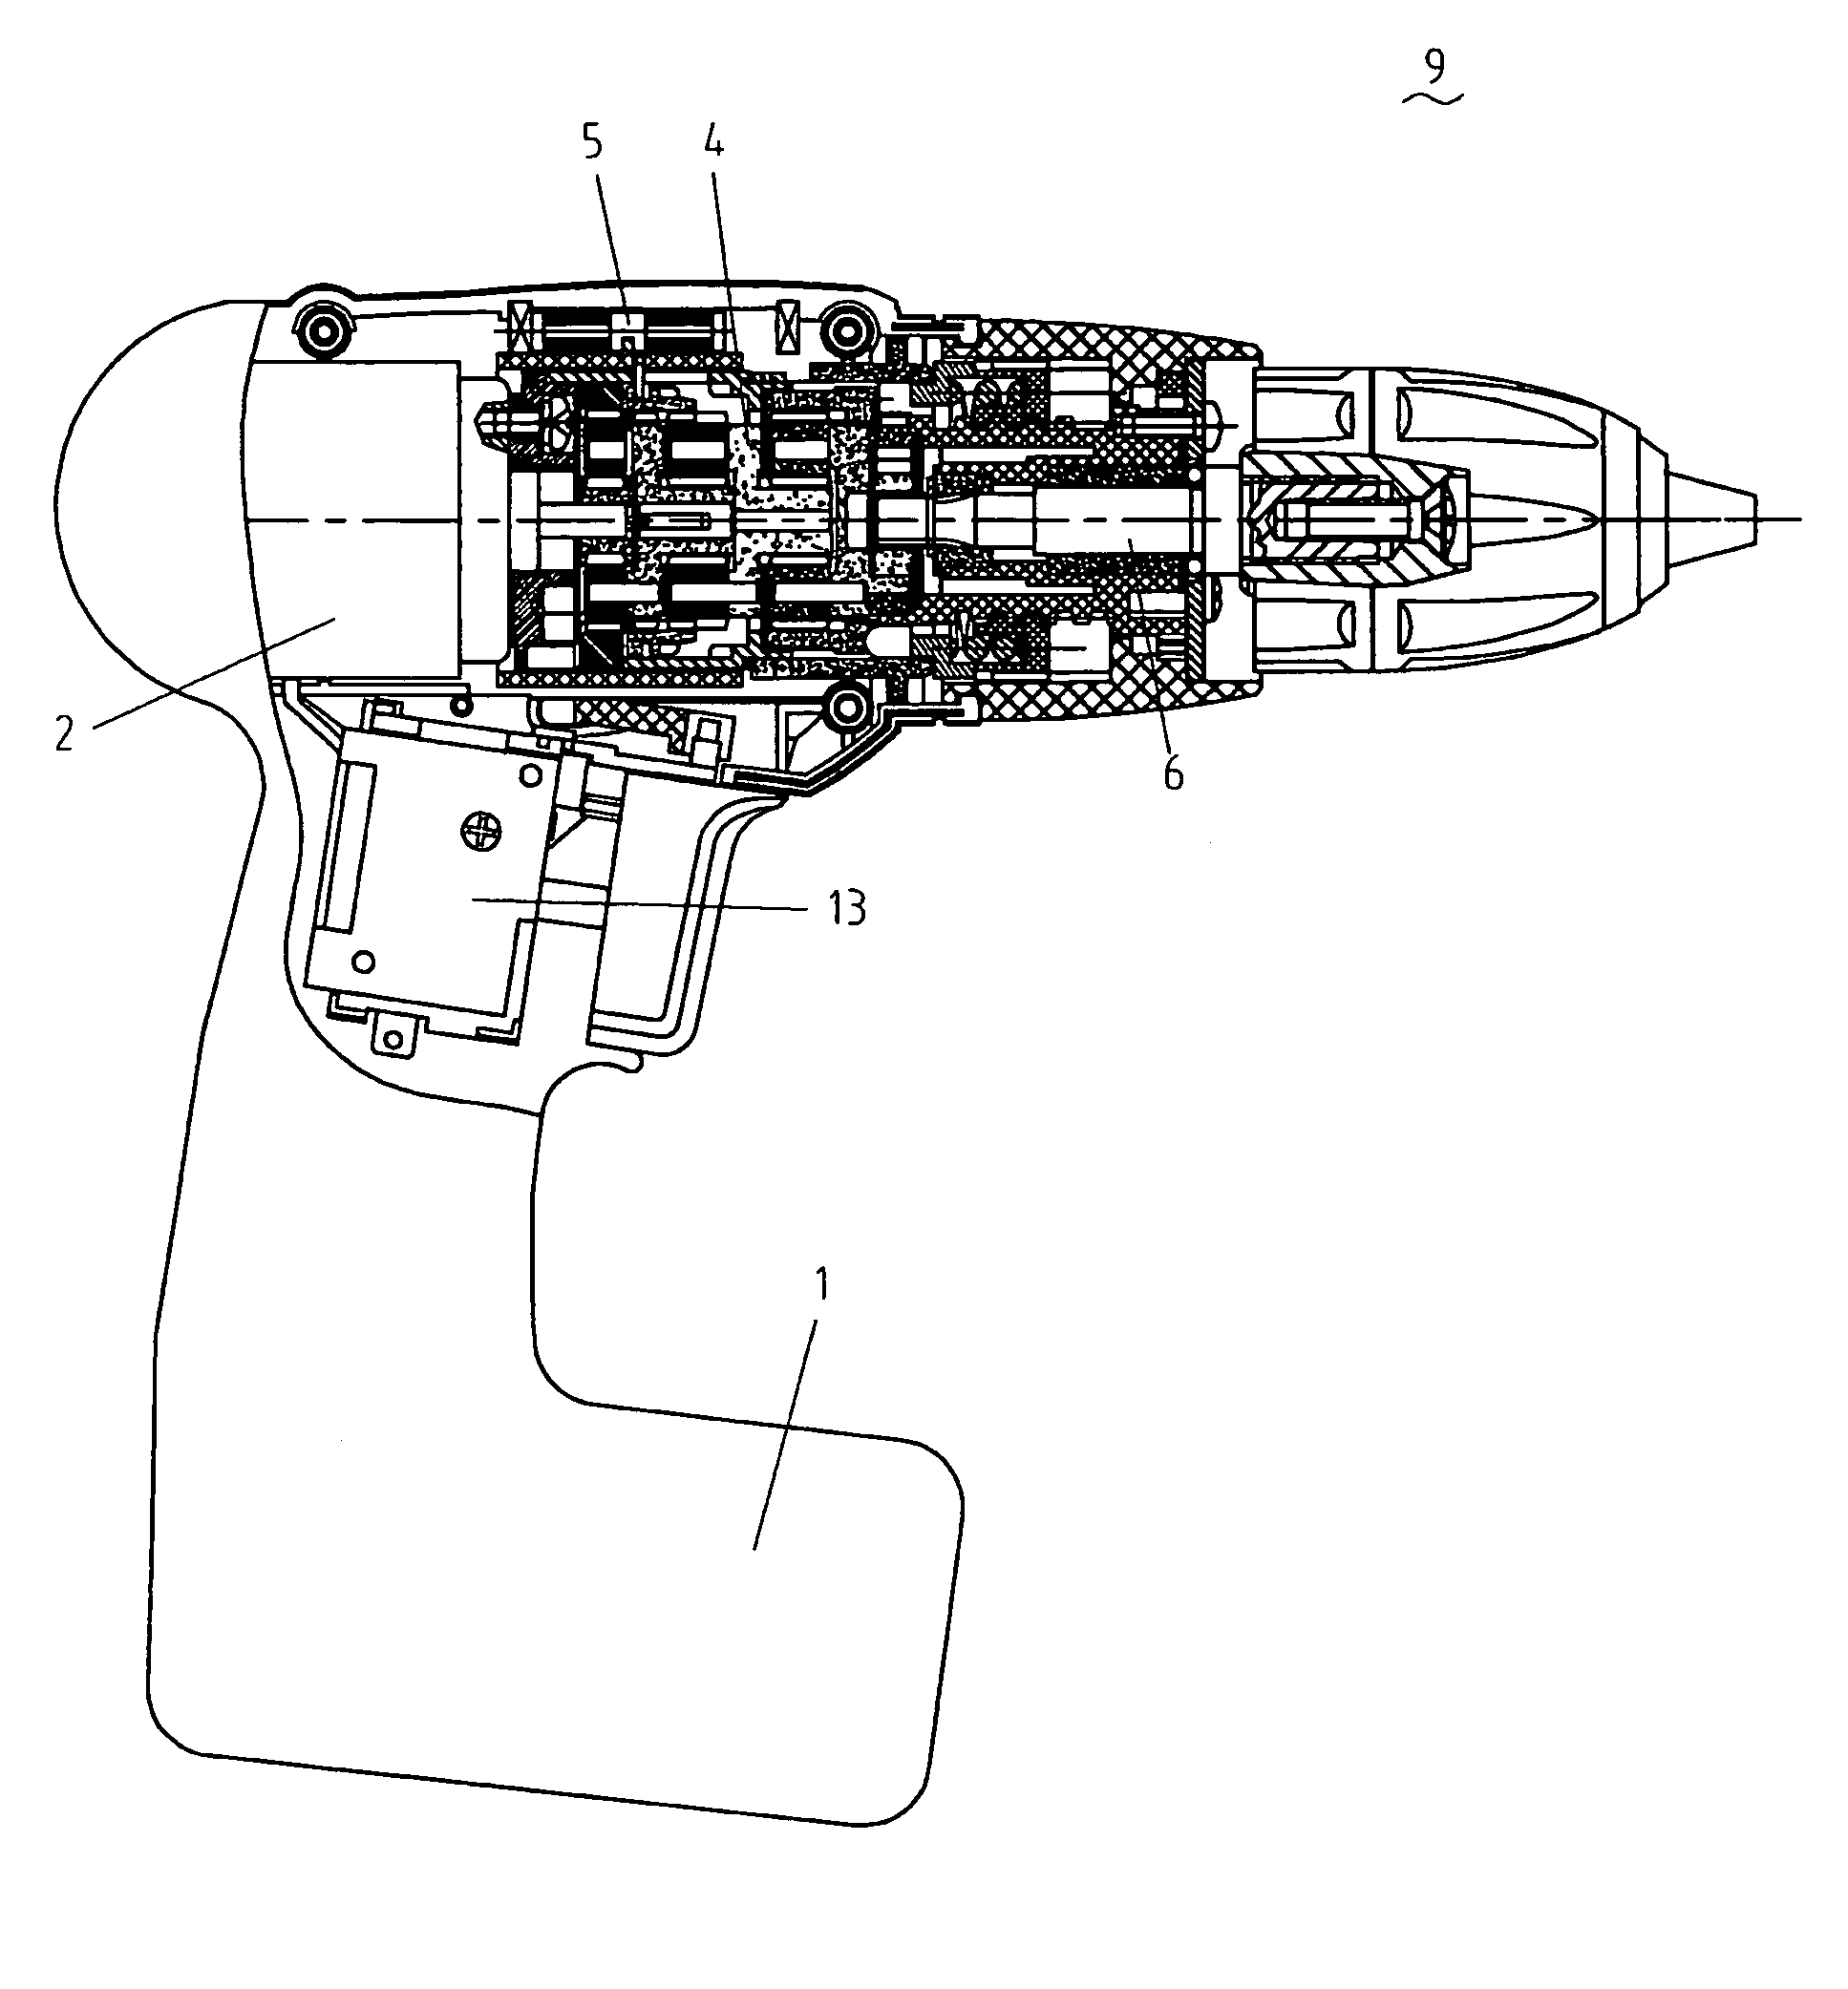 Power tool having control system for changing rotational speed of output shaft